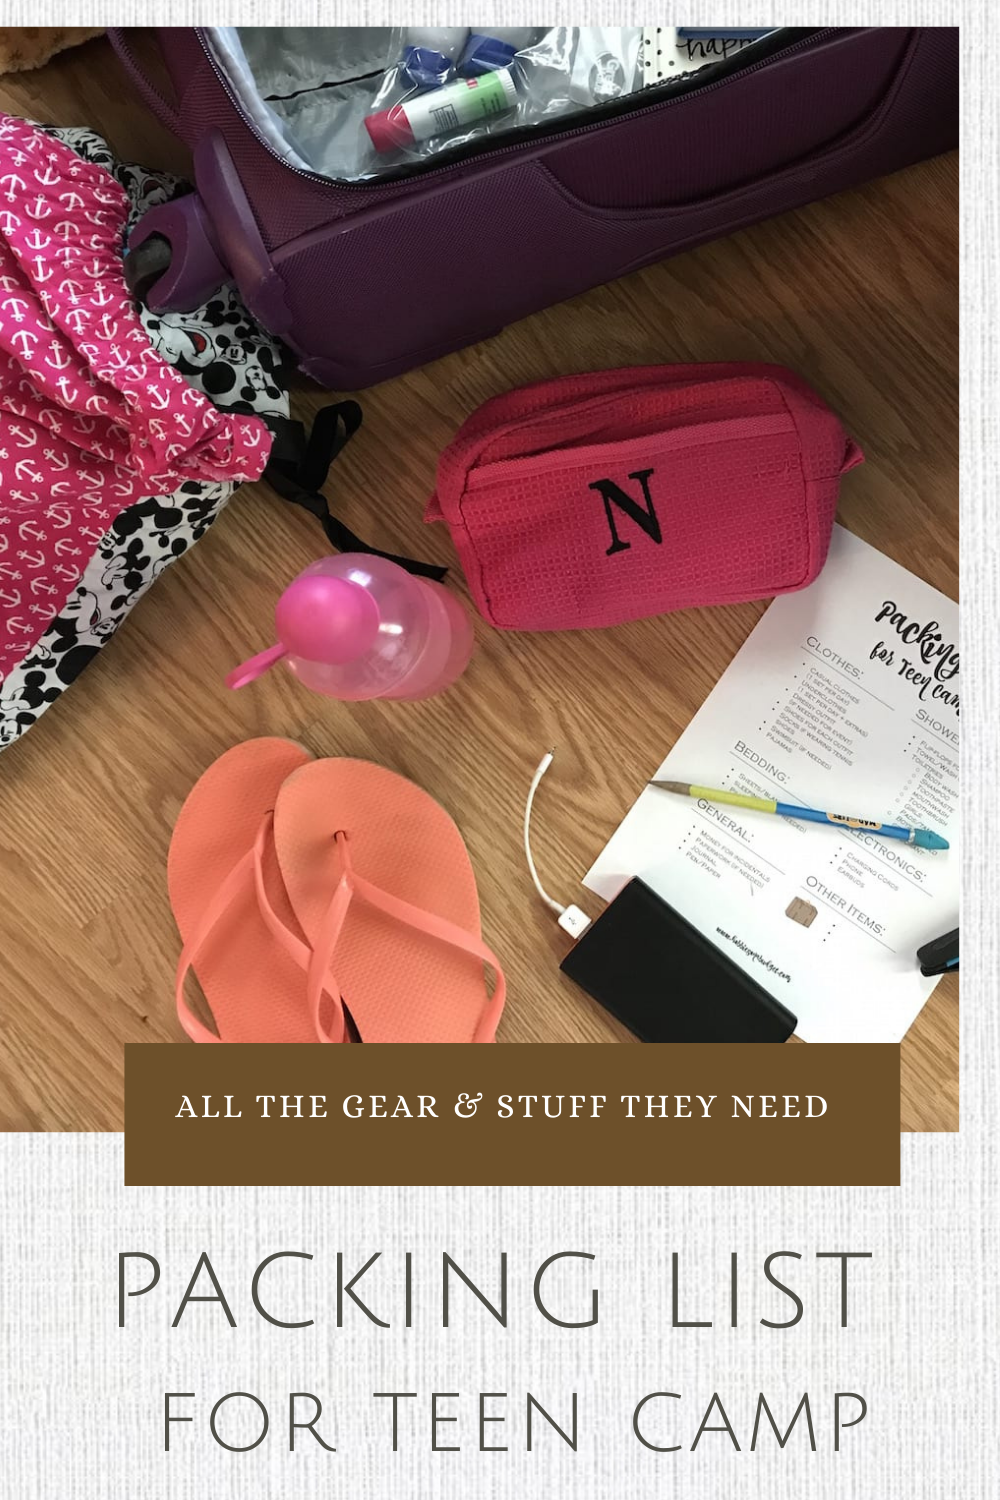 Packing List for Teen Camp - Hobbies on a Budget